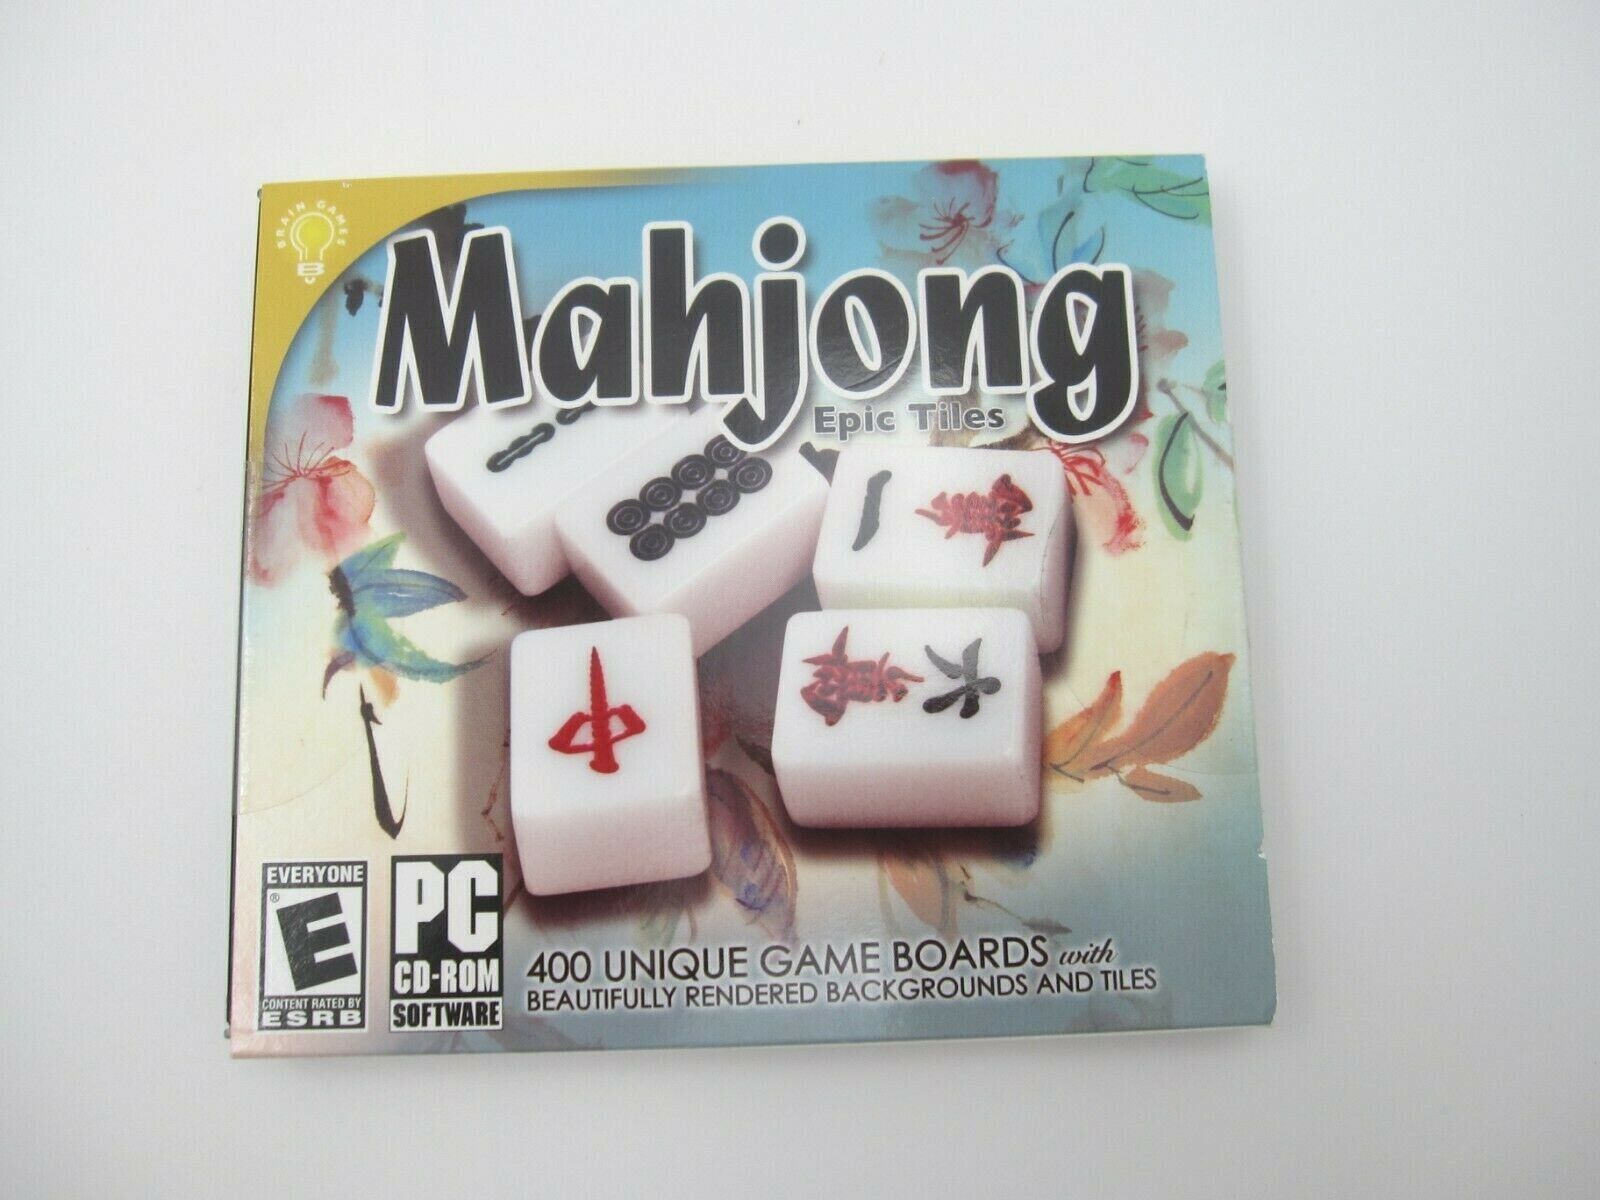 New Sealed Mahjon Epic 400 Unique Game Boards PC CD Rom Game (Rated E)